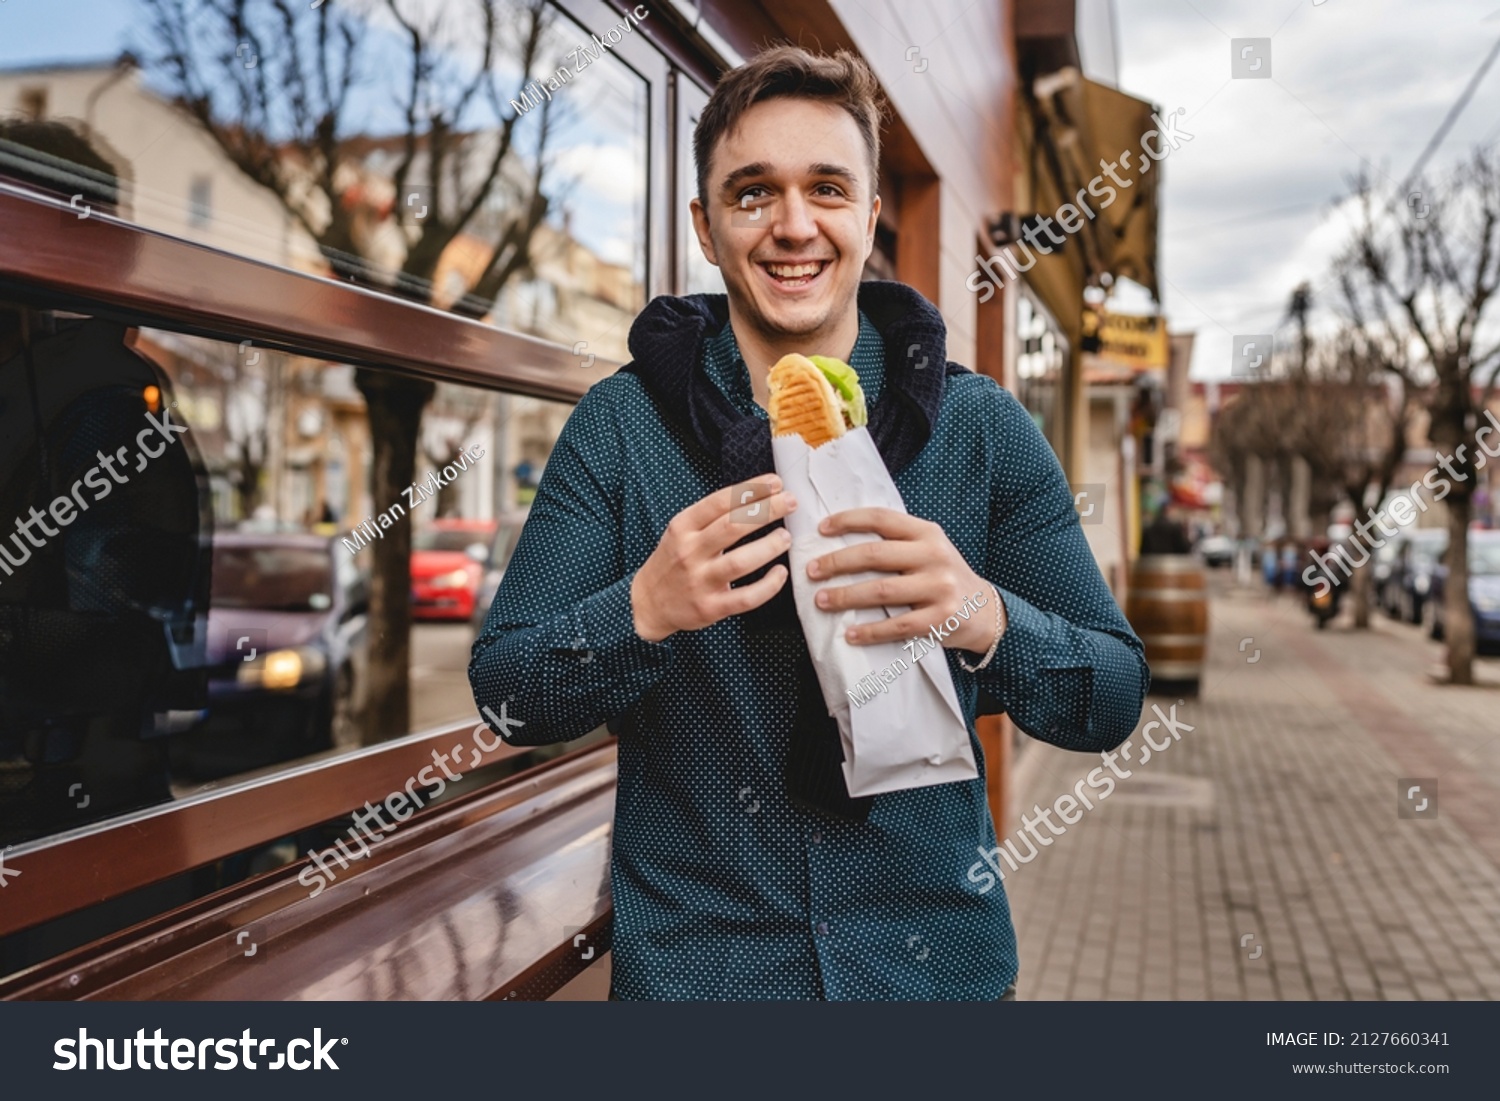 One man standing on the street in autumn spring or winter day holding sandwich wearing jacket eating on the feet while waiting outdoor in front of building real people copy space fast food concept #2127660341